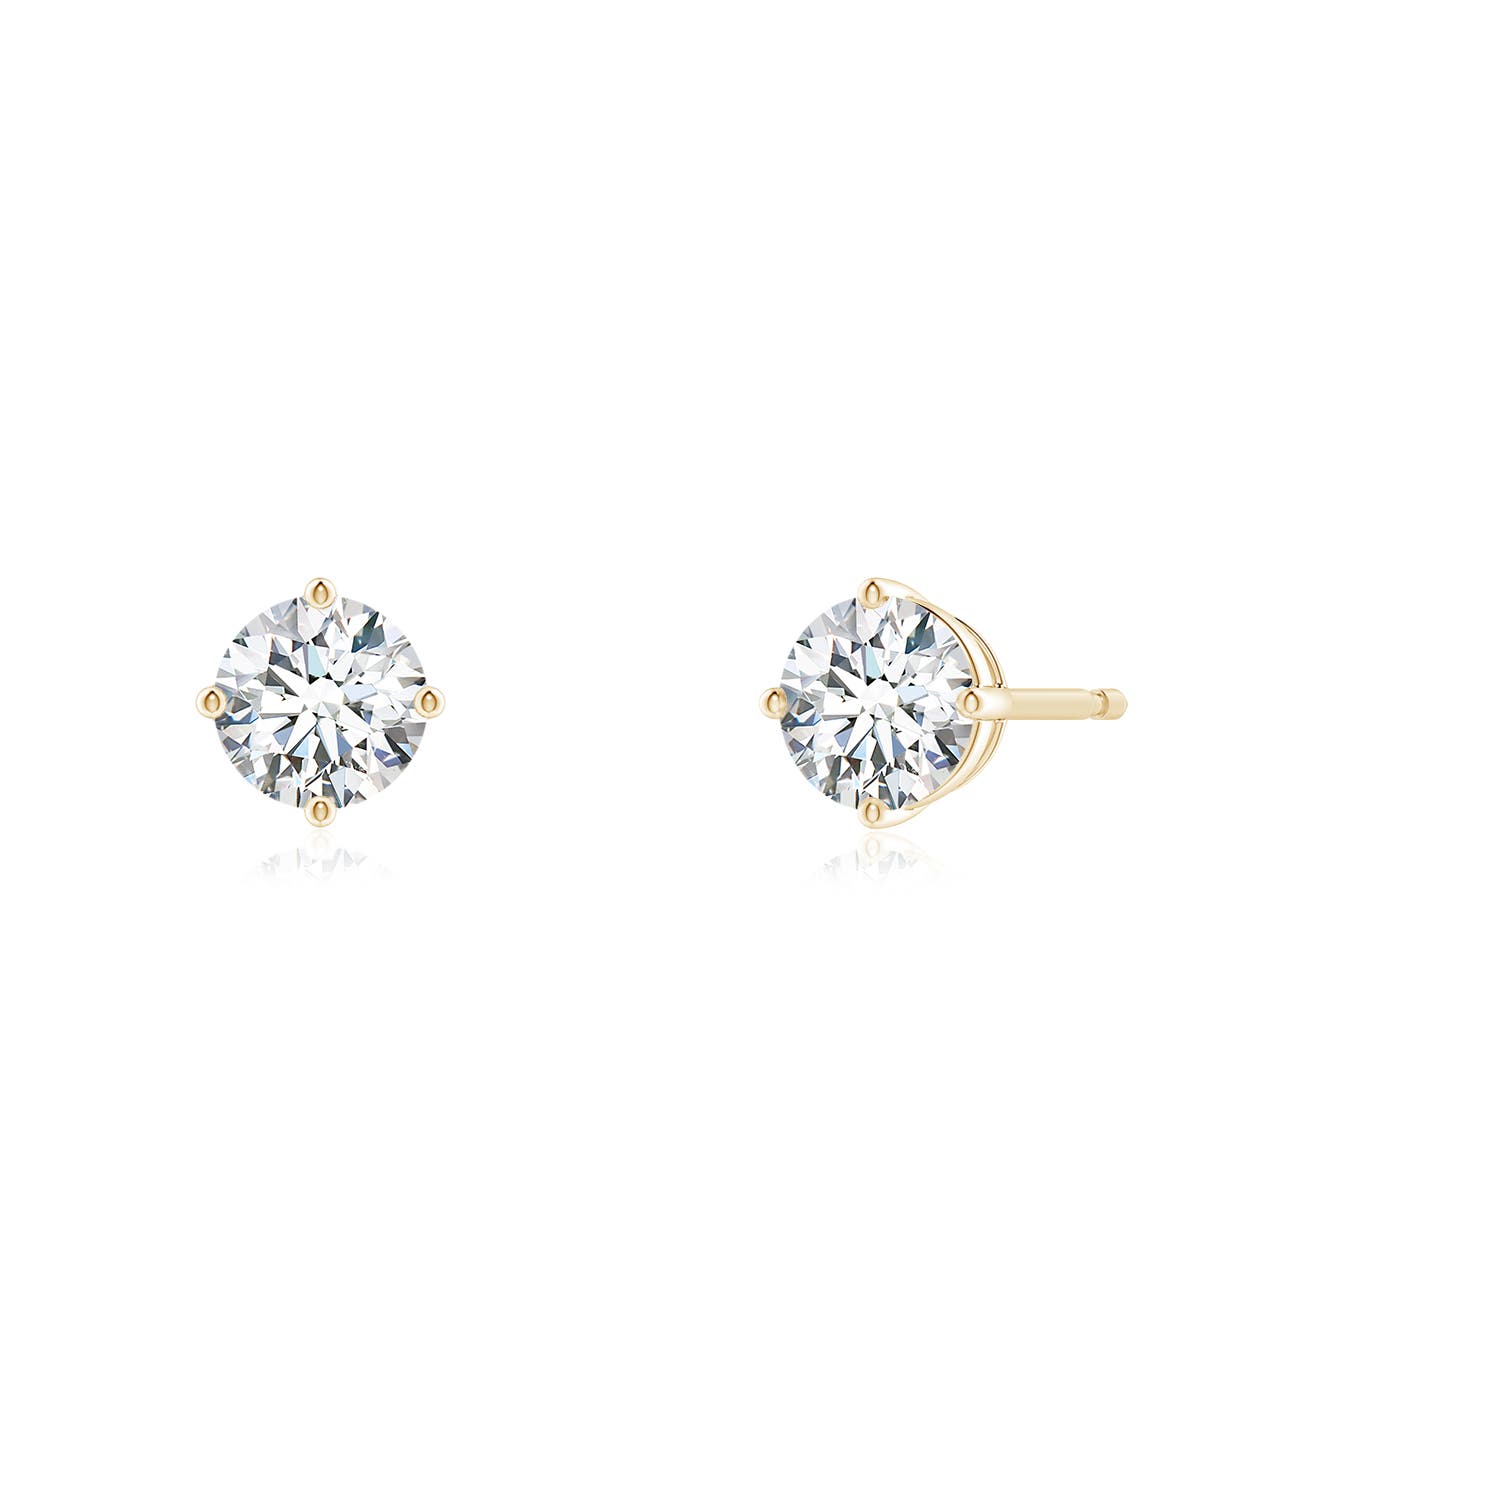 GVS2 / 0.76 CT / 14 KT Yellow Gold